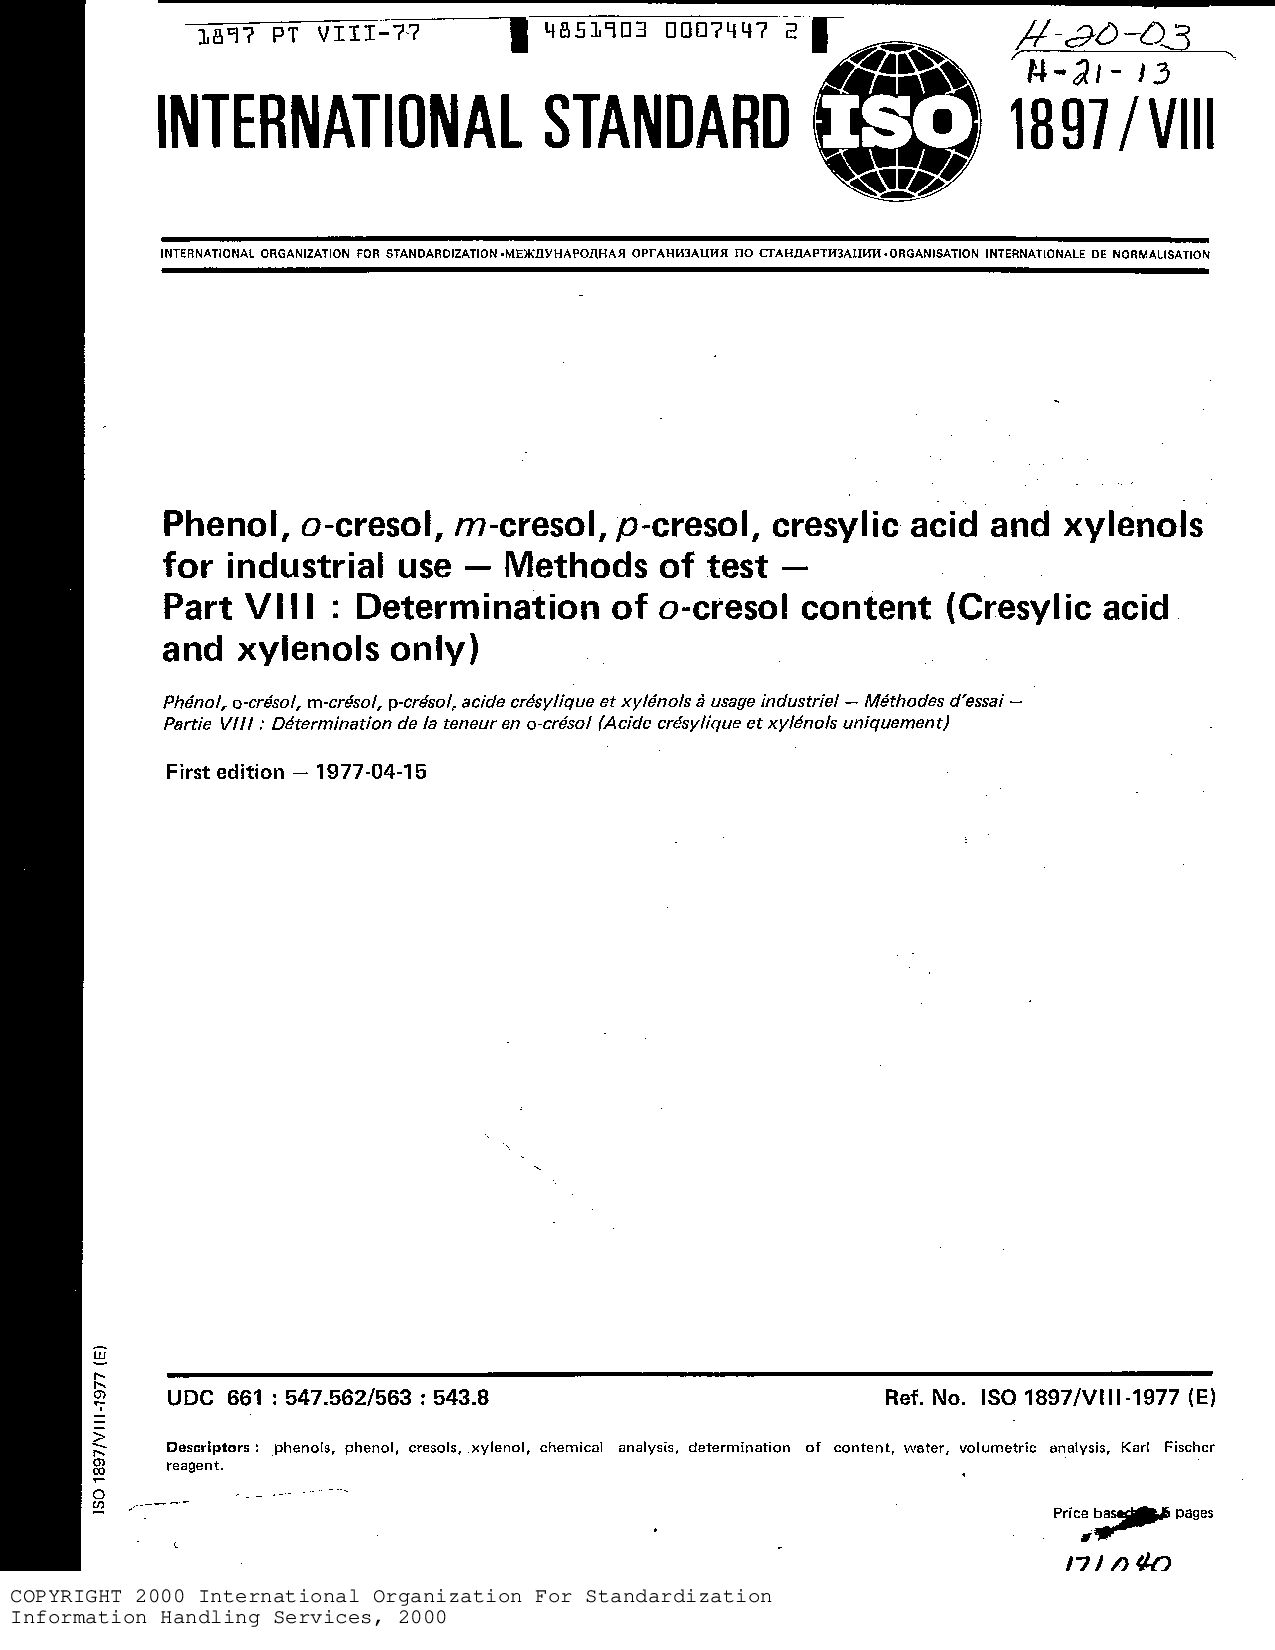 ISO 1897-8:1977